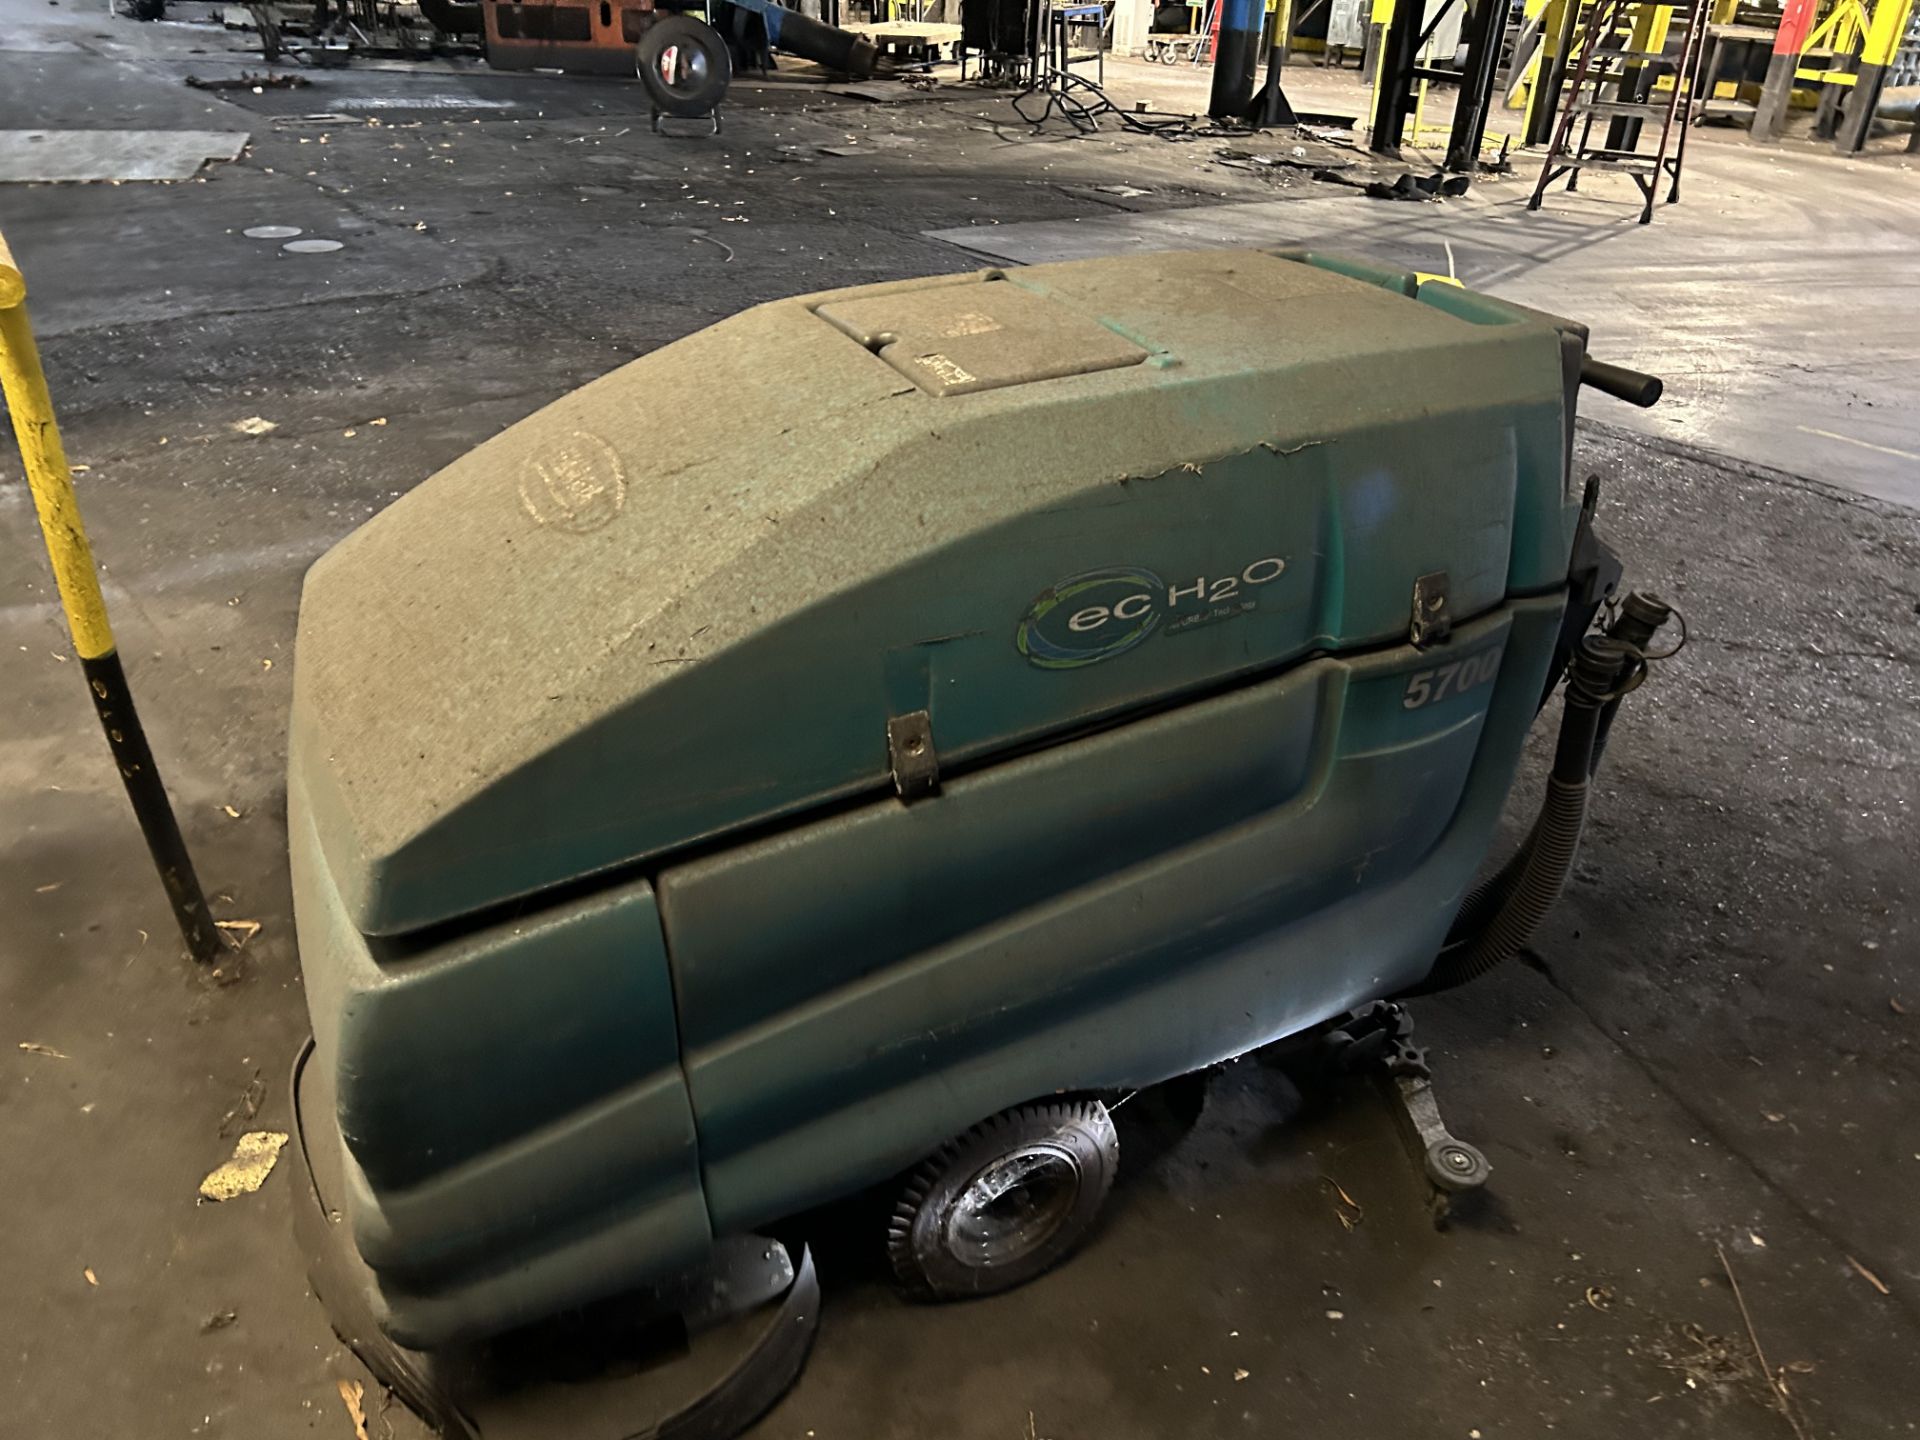 Tennant Floor Scrubber, Model #5700, Rigging/ Removal Fee - $75 - Image 3 of 4